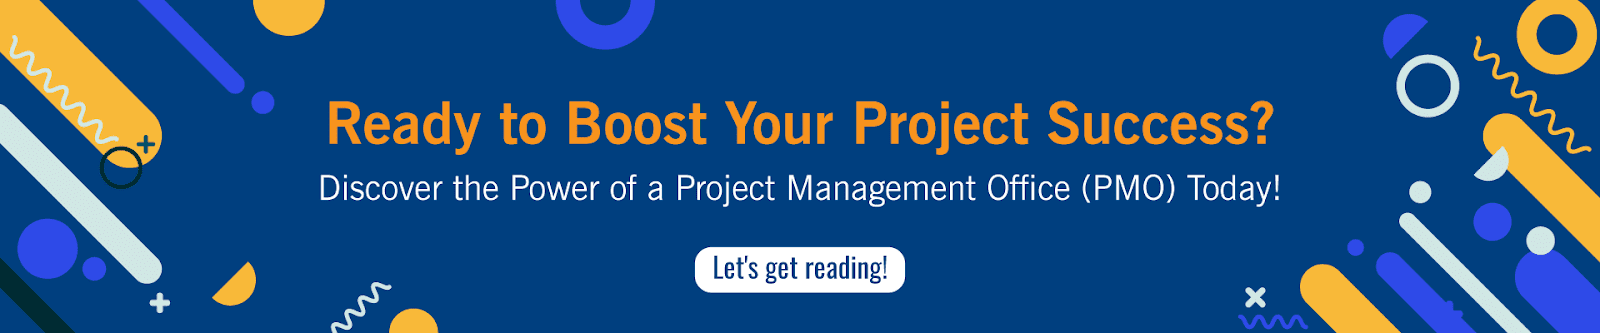 Discover the power of a project management office (PMO)